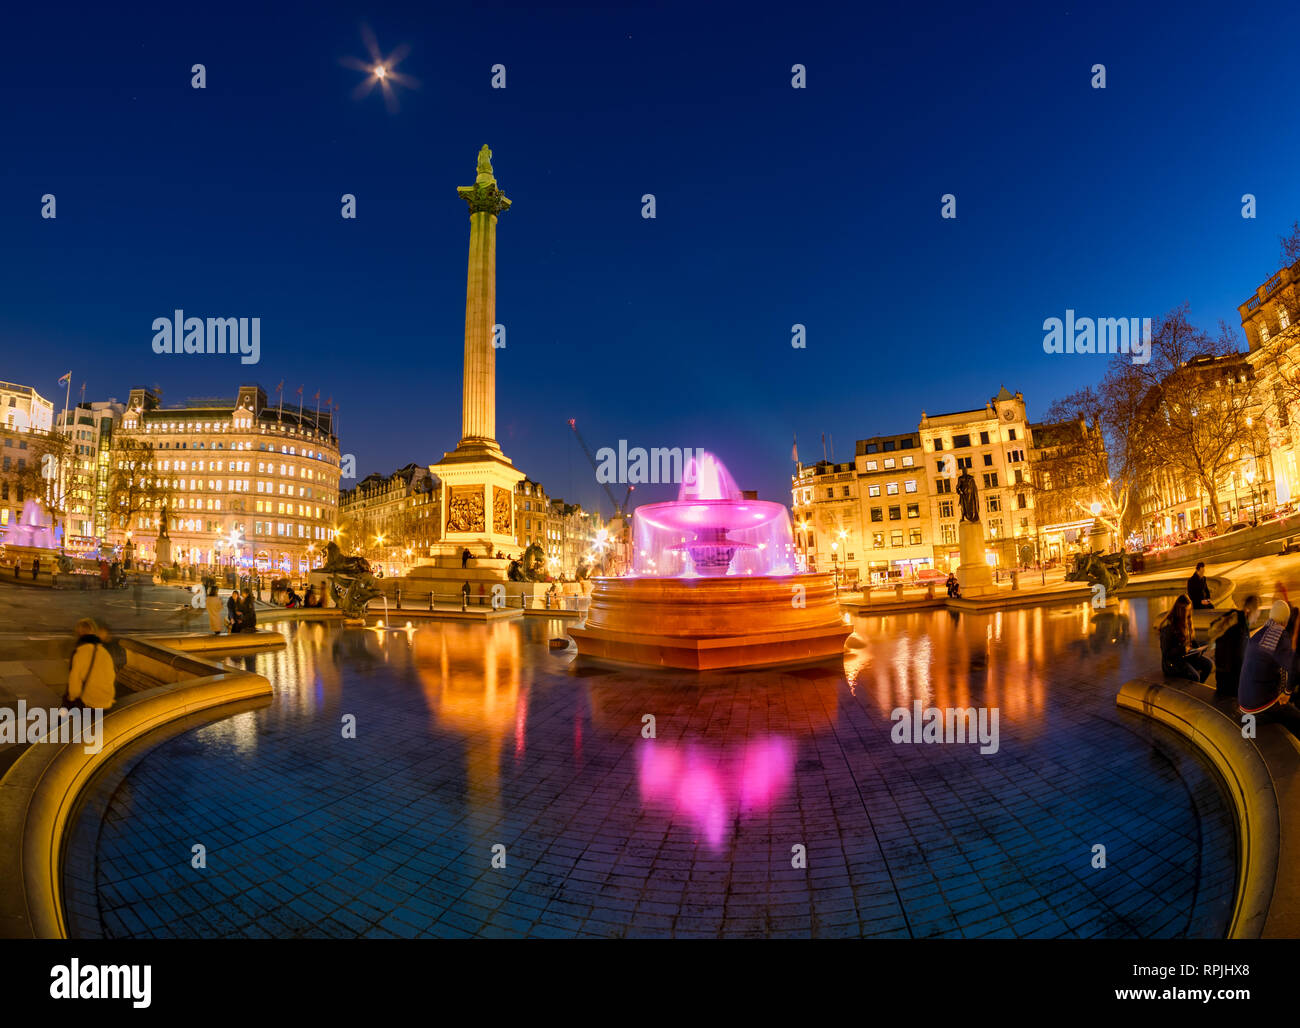 Beautiful cityscape view of Trafalgar square in evening lights with the famous Nelson's Column and fountain in Central London, UK Stock Photo